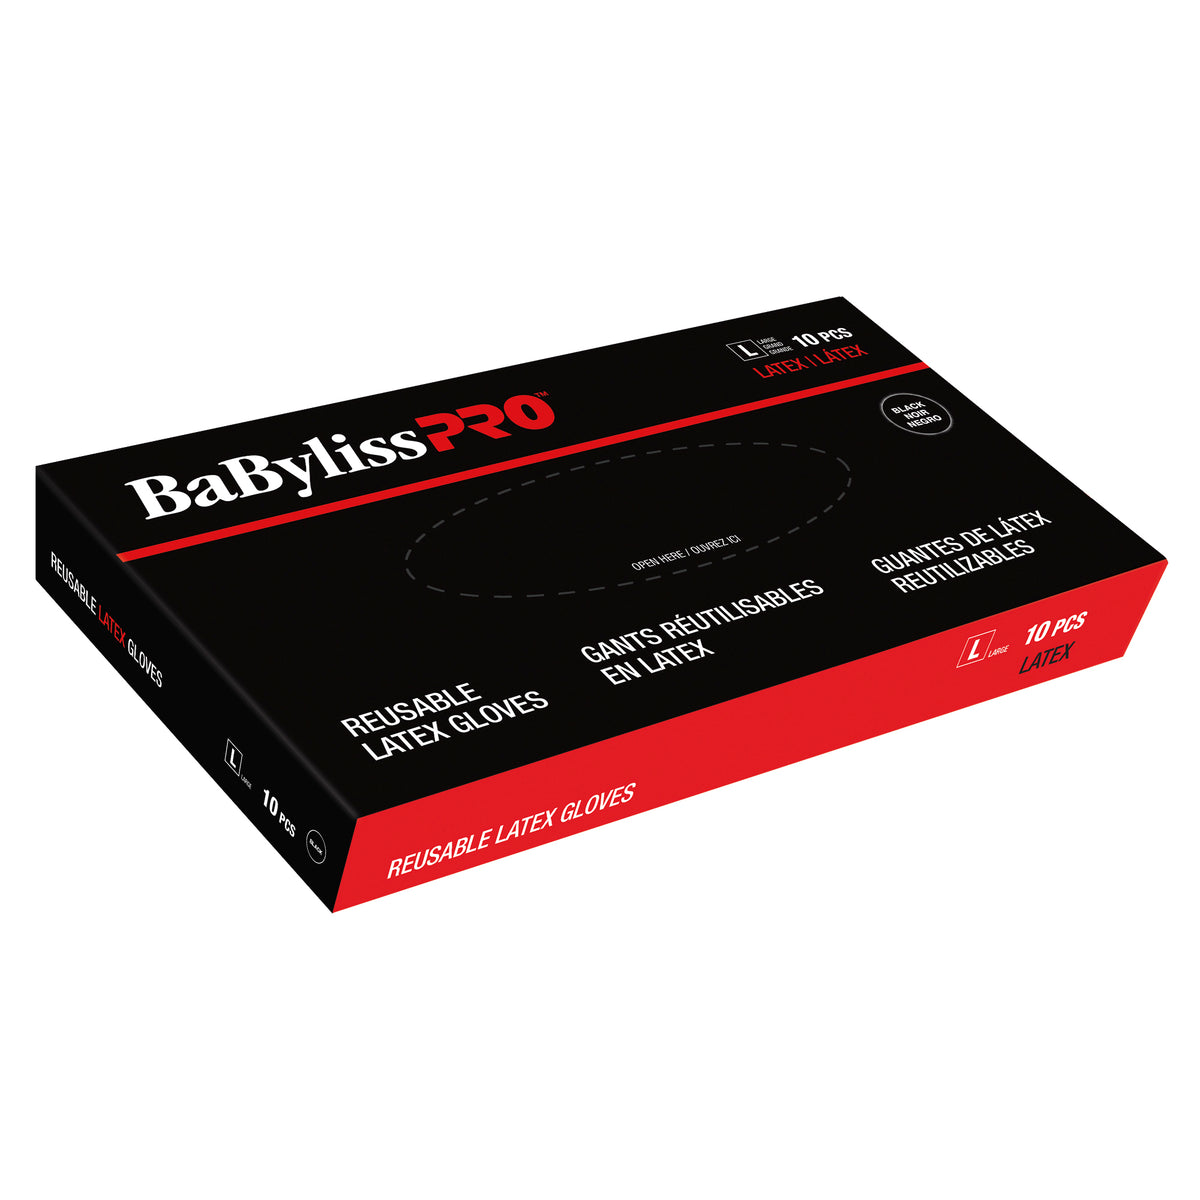 BaBylissPRO Reusable Latex Gloves, Large – Box of 10